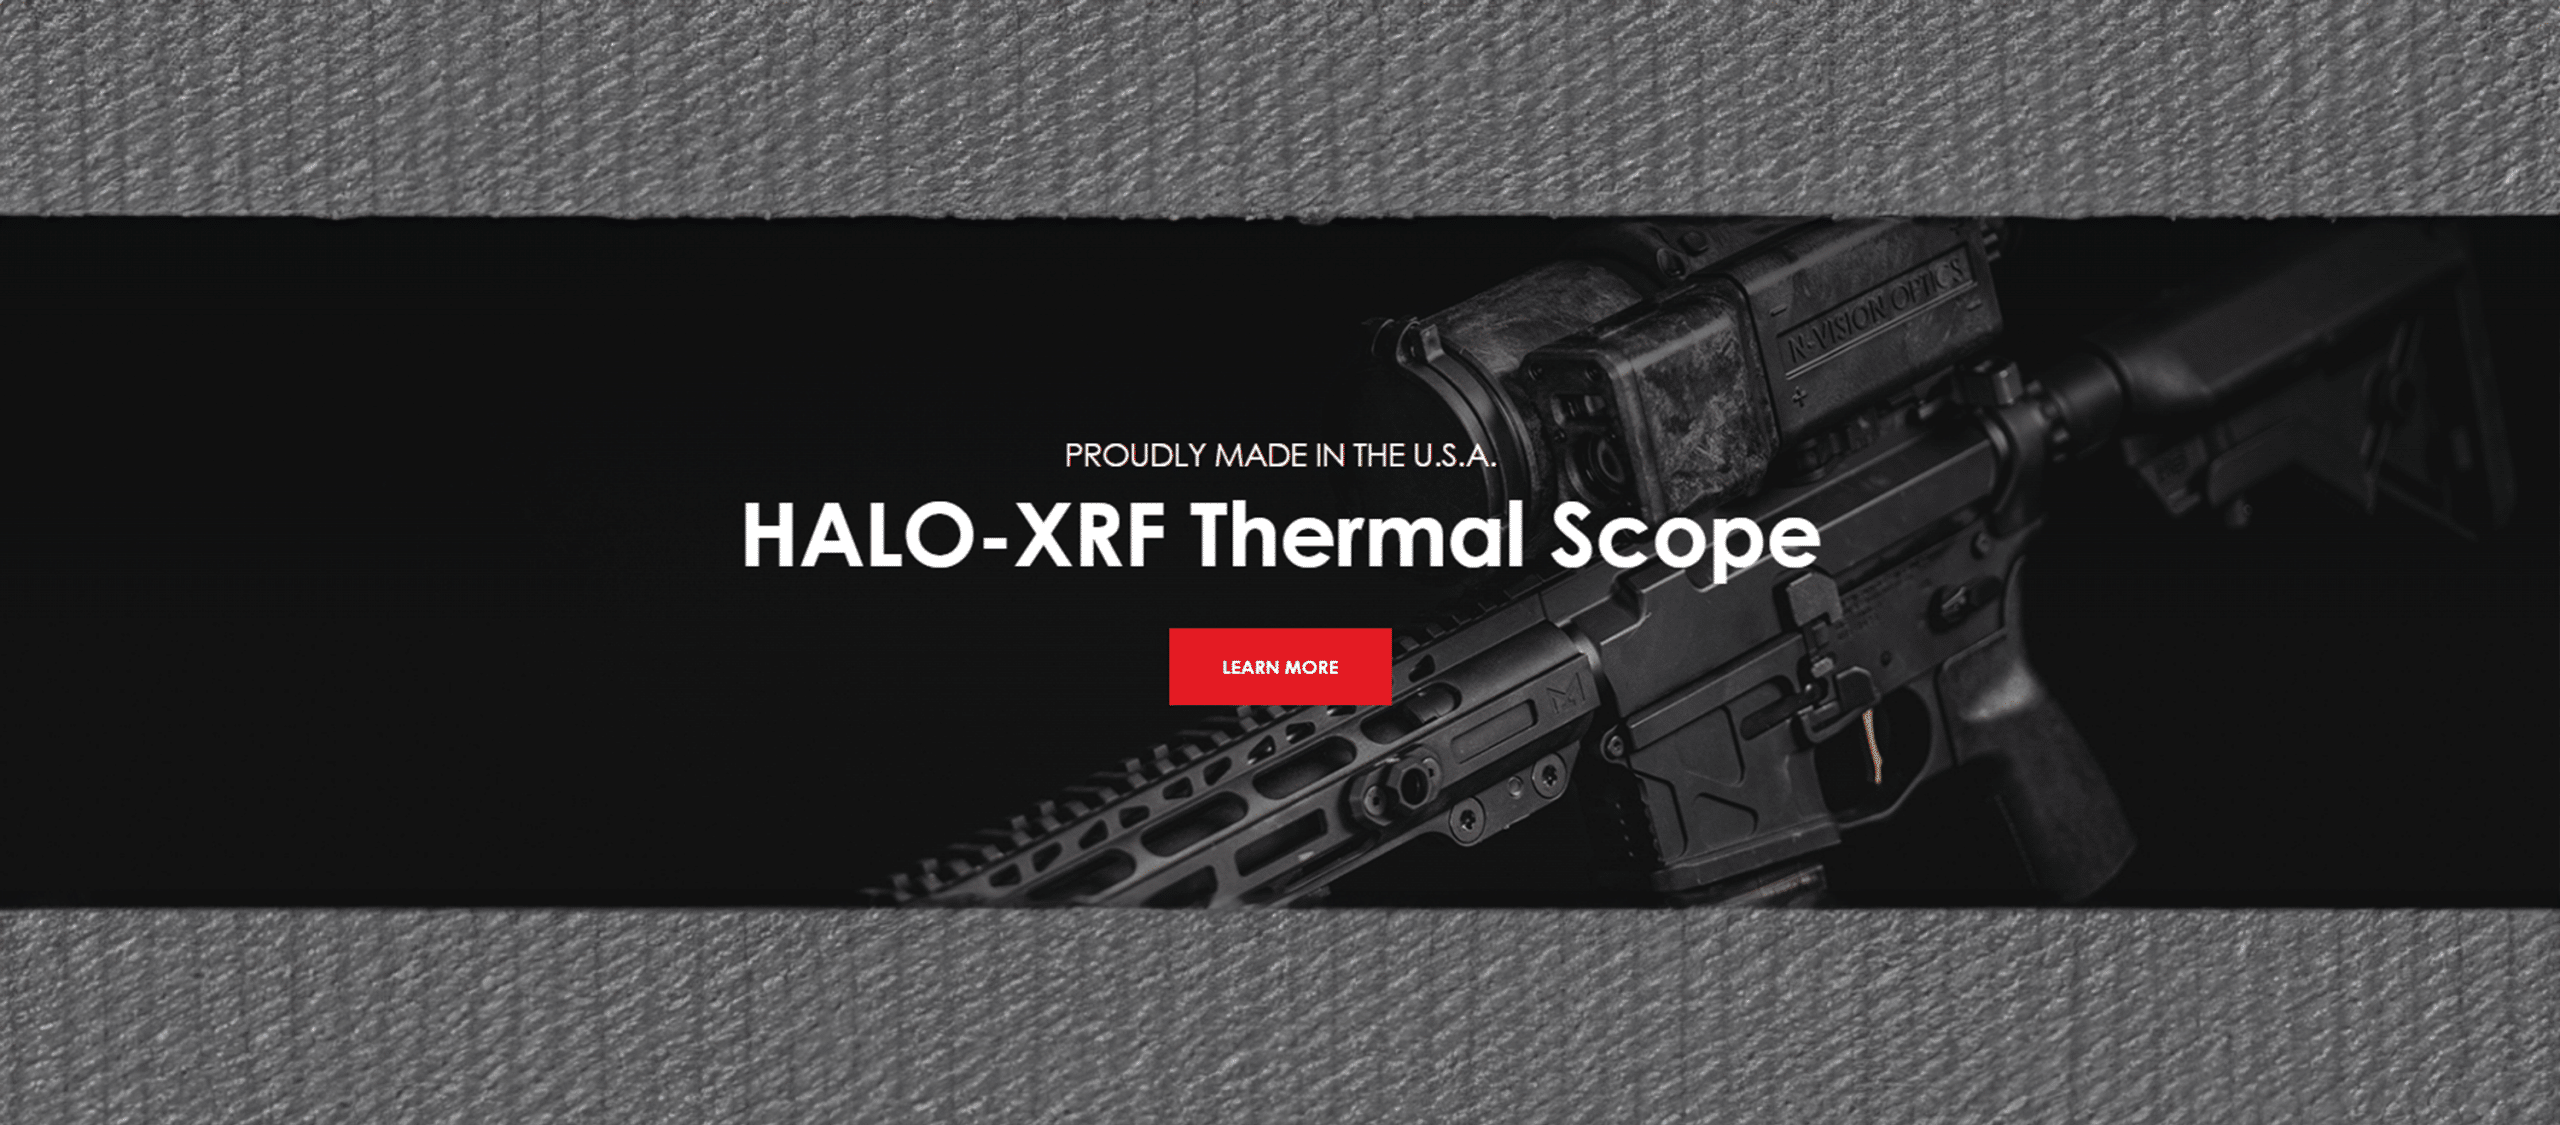 HALO-XRF Thermal Scope